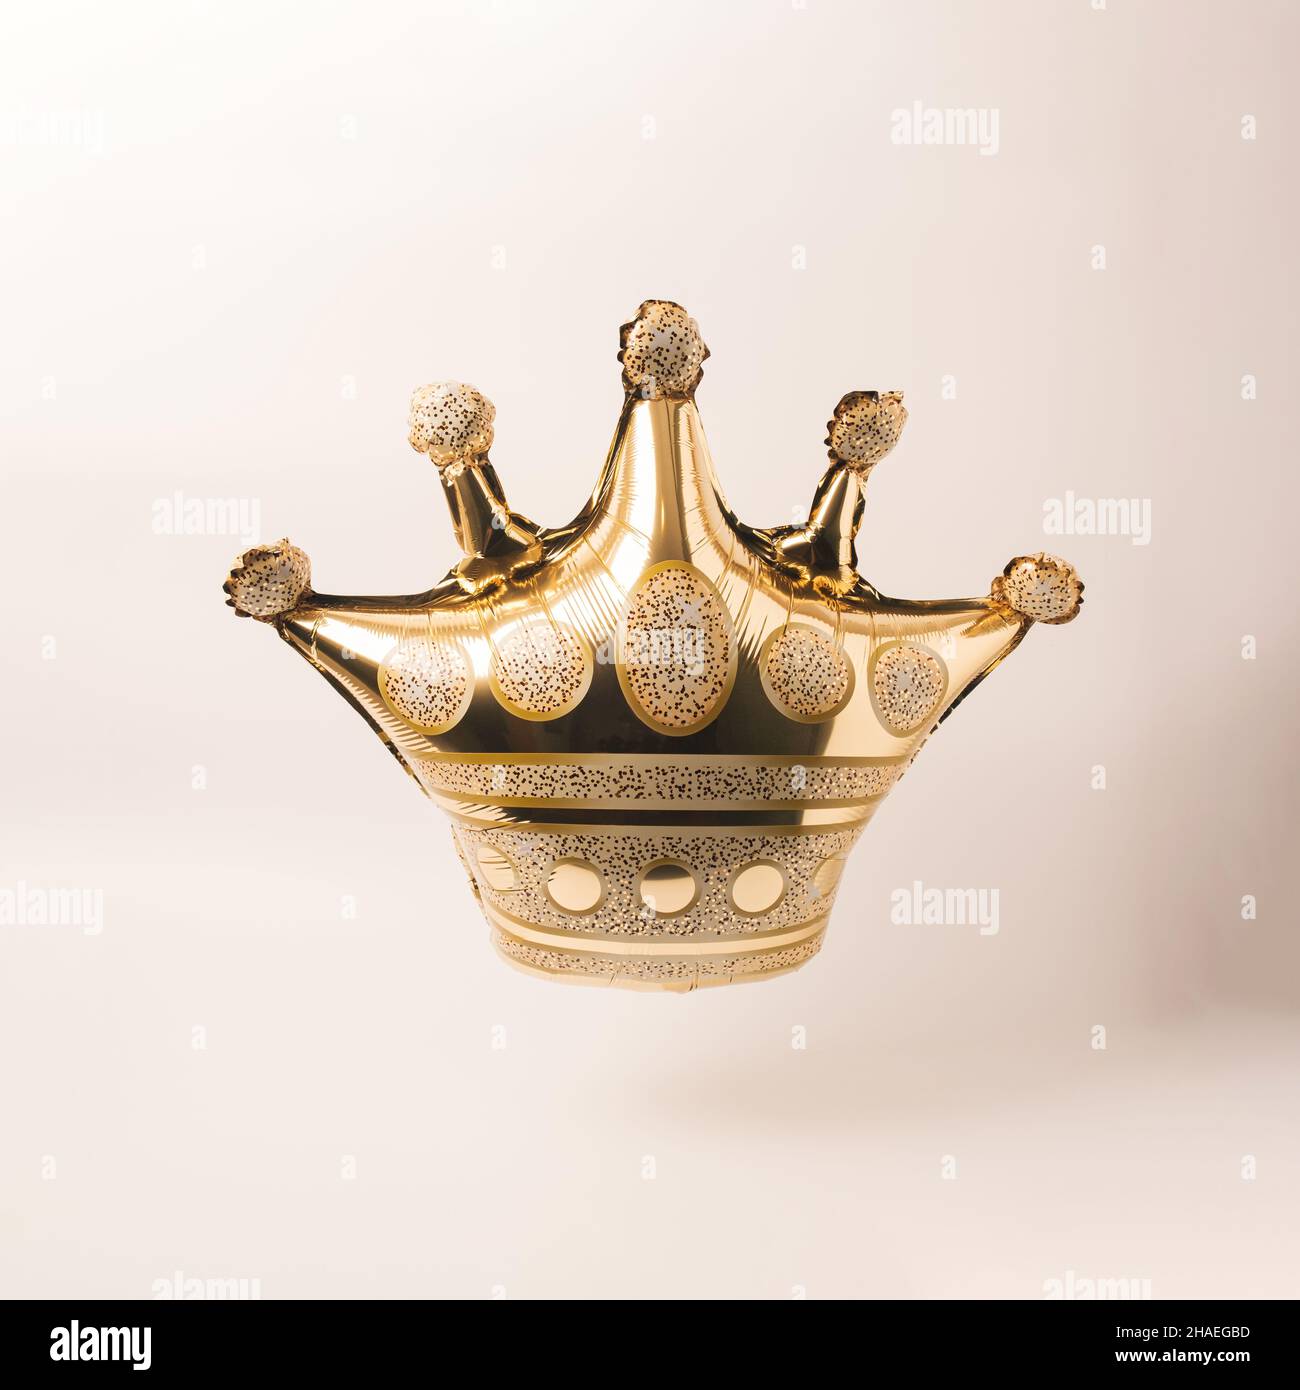 Golden crown shaped floating balloon on a beige background. Minimal New Year celebration concept. Stock Photo